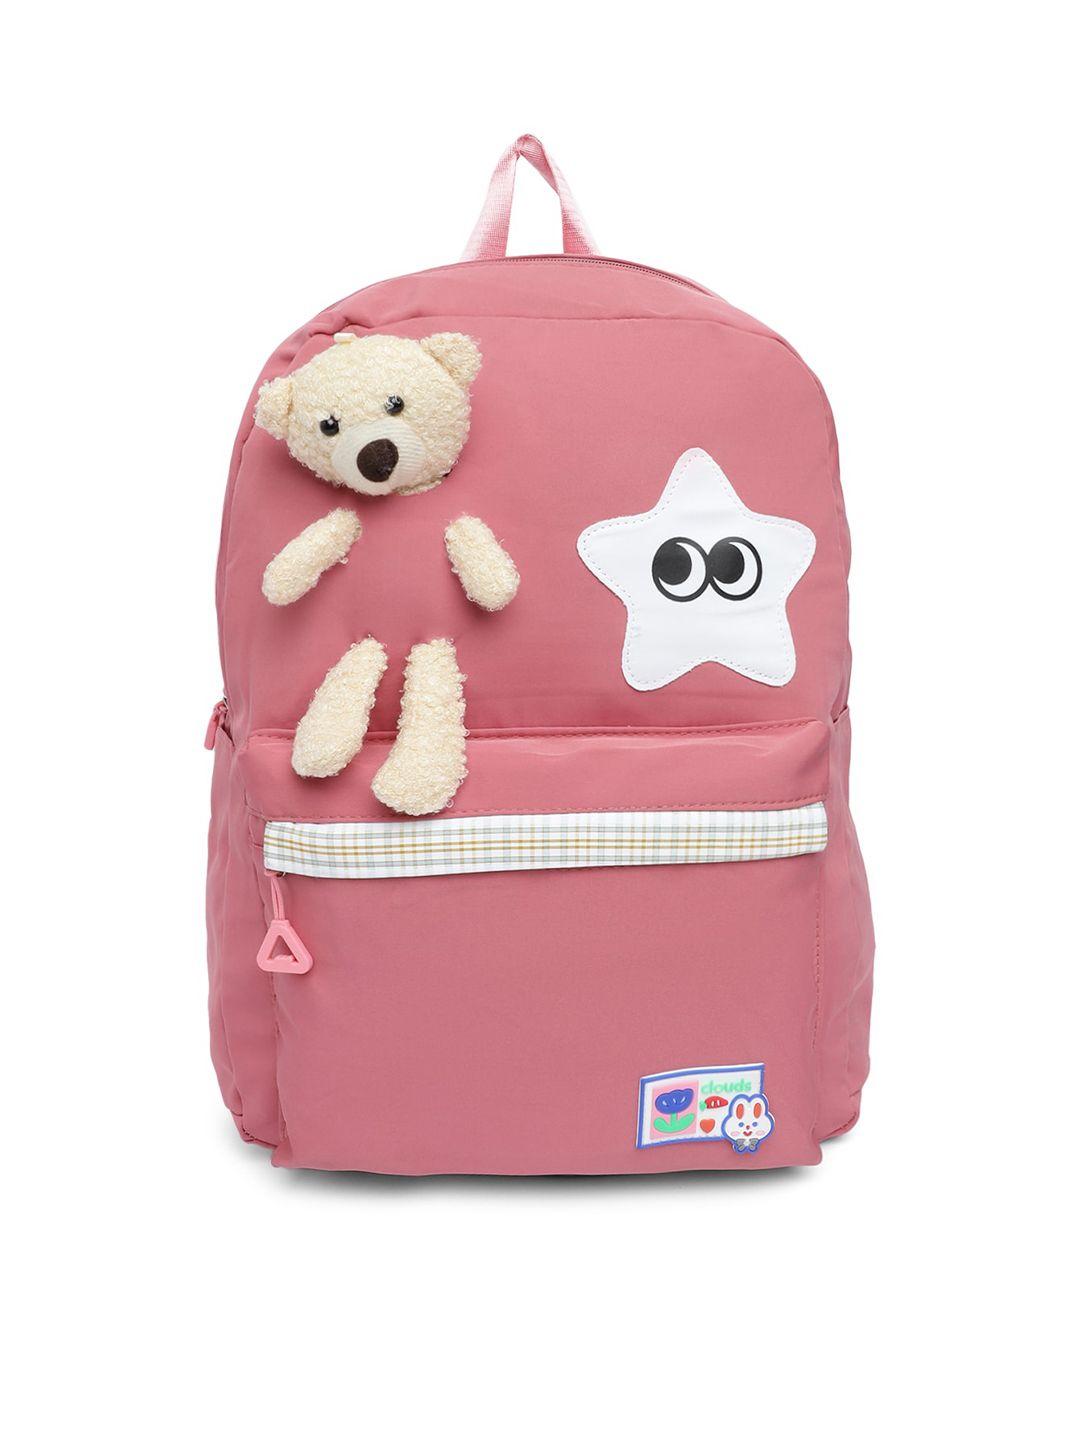 kids on board unisex kids backpack with attached teddy & star